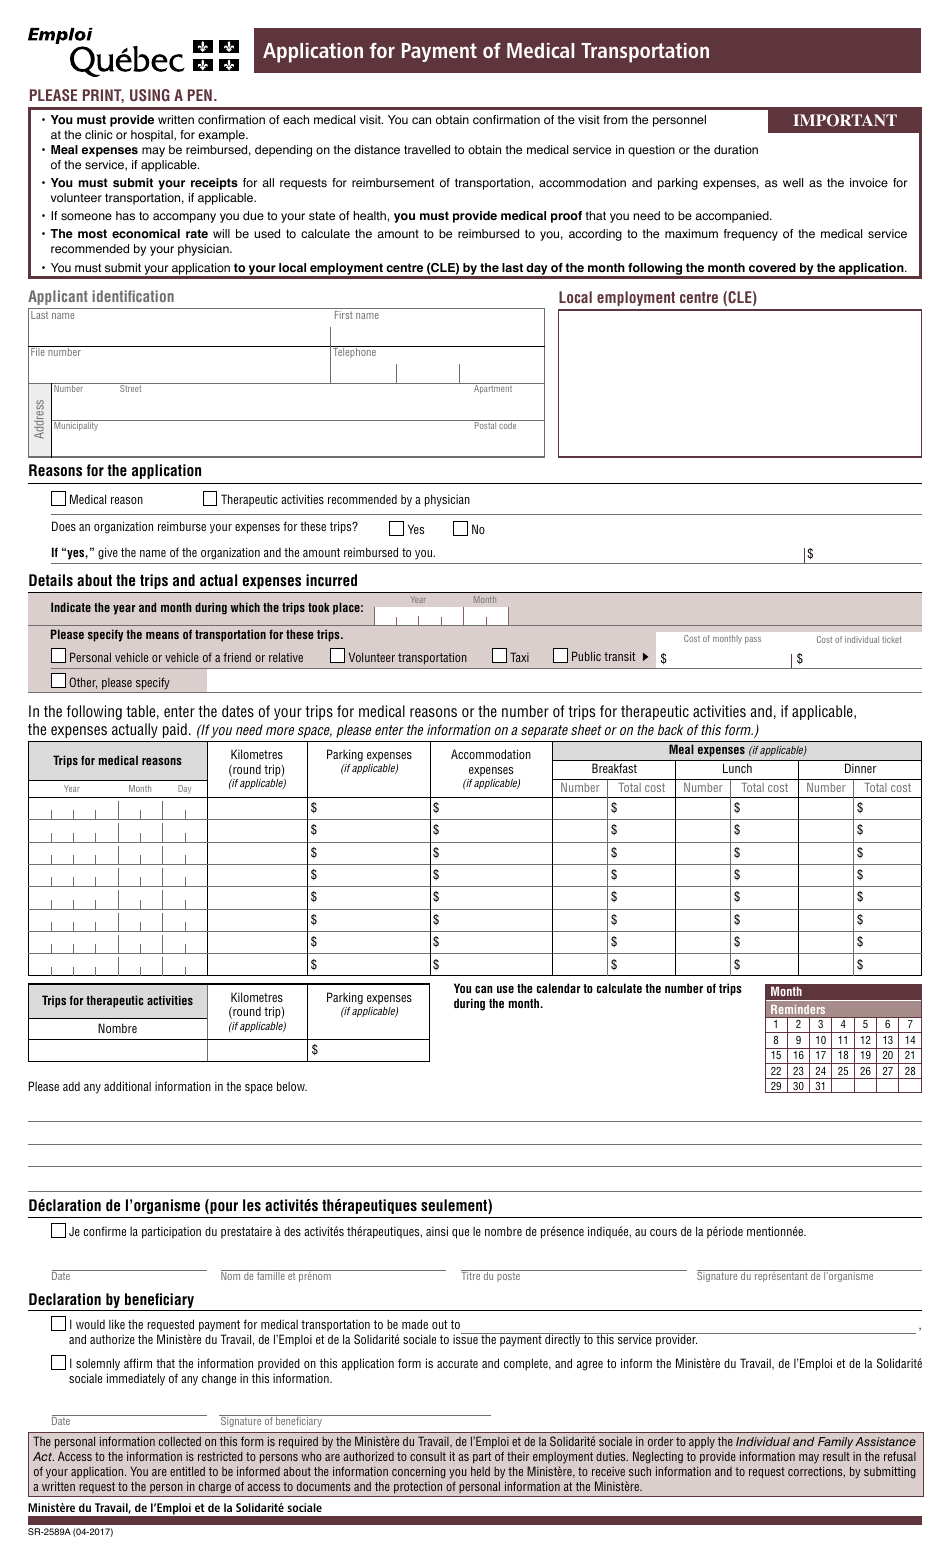 Form SR-2589A Application for Payment of Medical Transportation - Quebec, Canada (English / French), Page 1